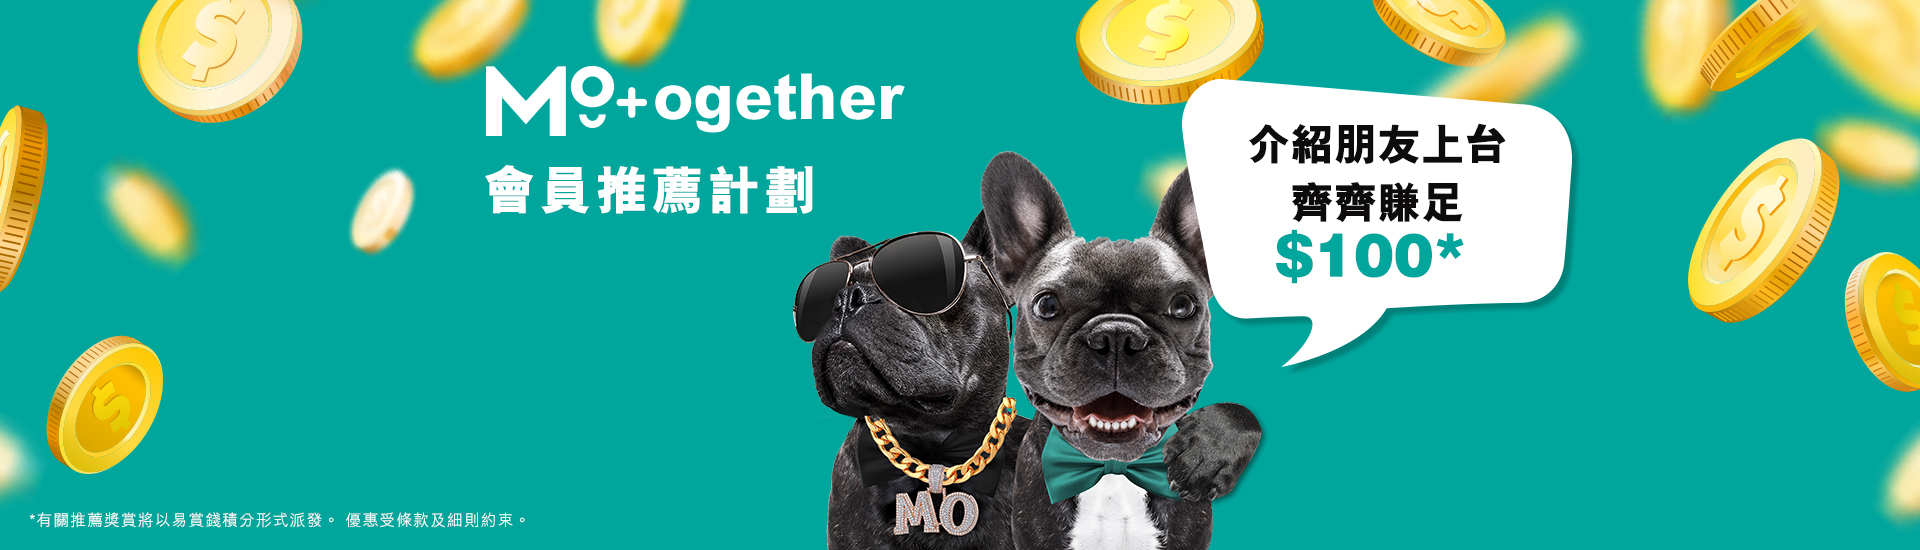 MO +ogether 會員推薦計劃